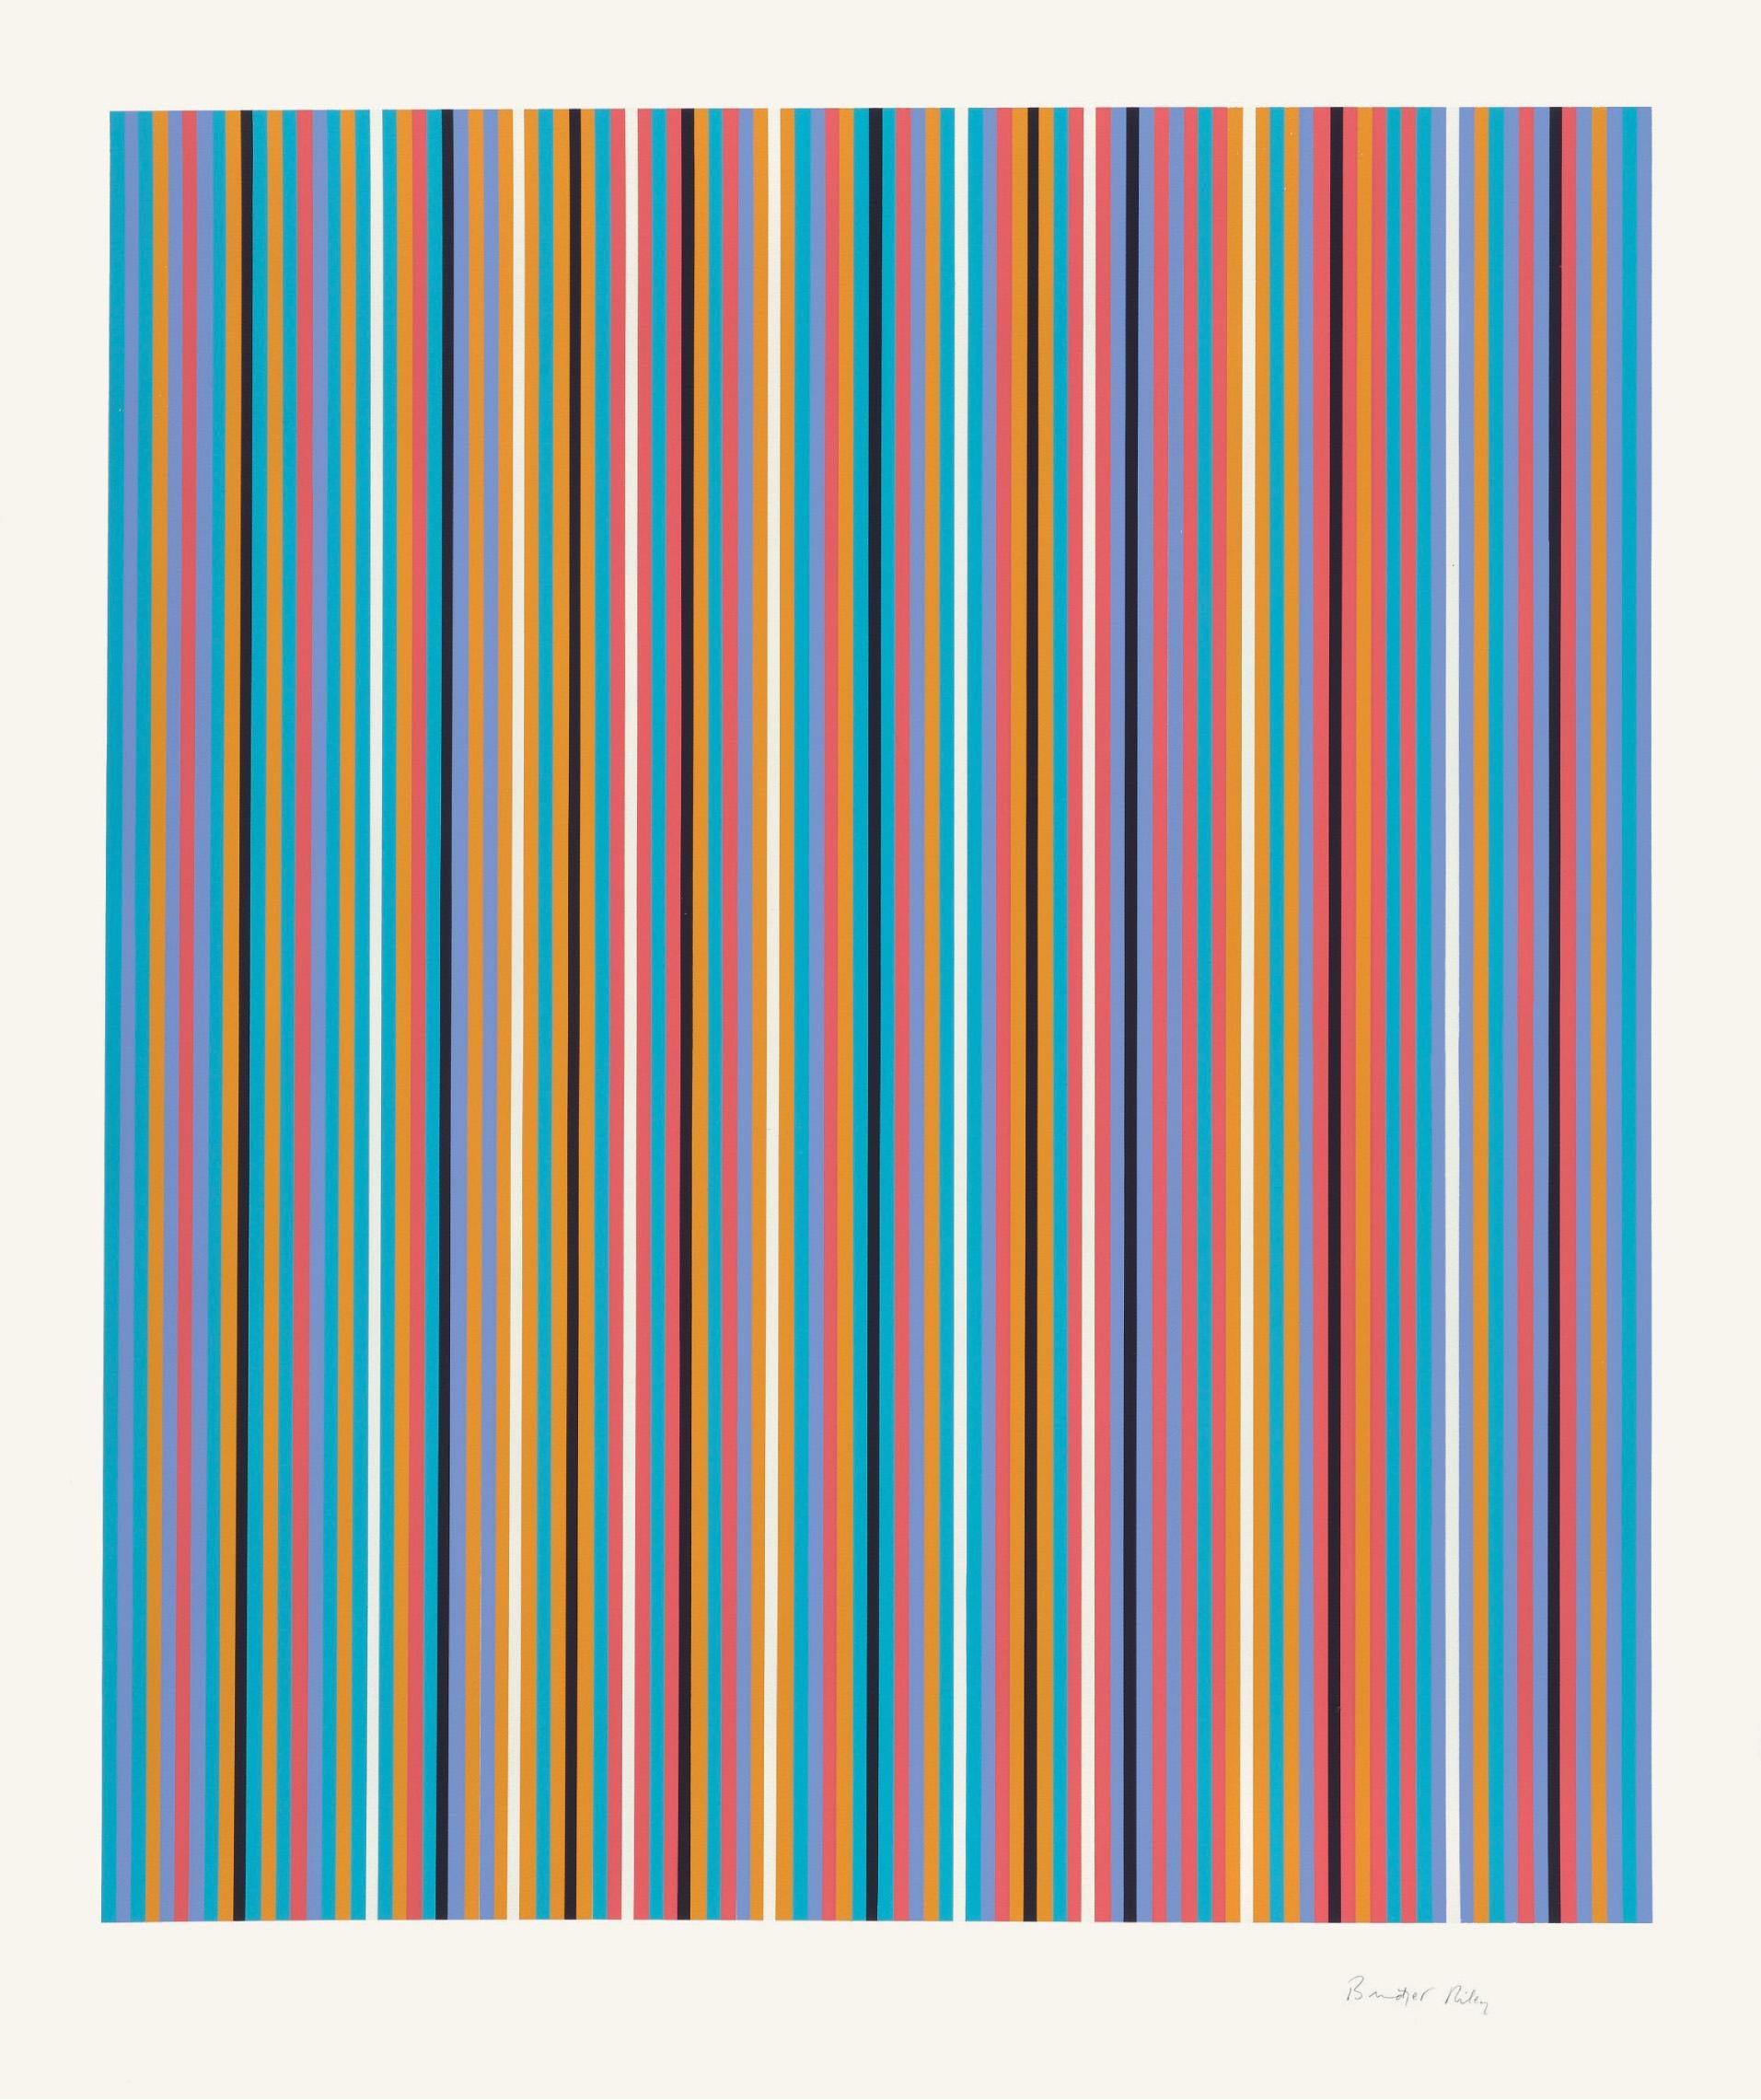 Bridget Riley is an abstract painter who came to prominence in the American Op Art movement of the 1960s, after her inclusion in the 1965 exhibition “The Responsive Eye” at The Museum of Modern Art. There, her black-and-white paintings—which created